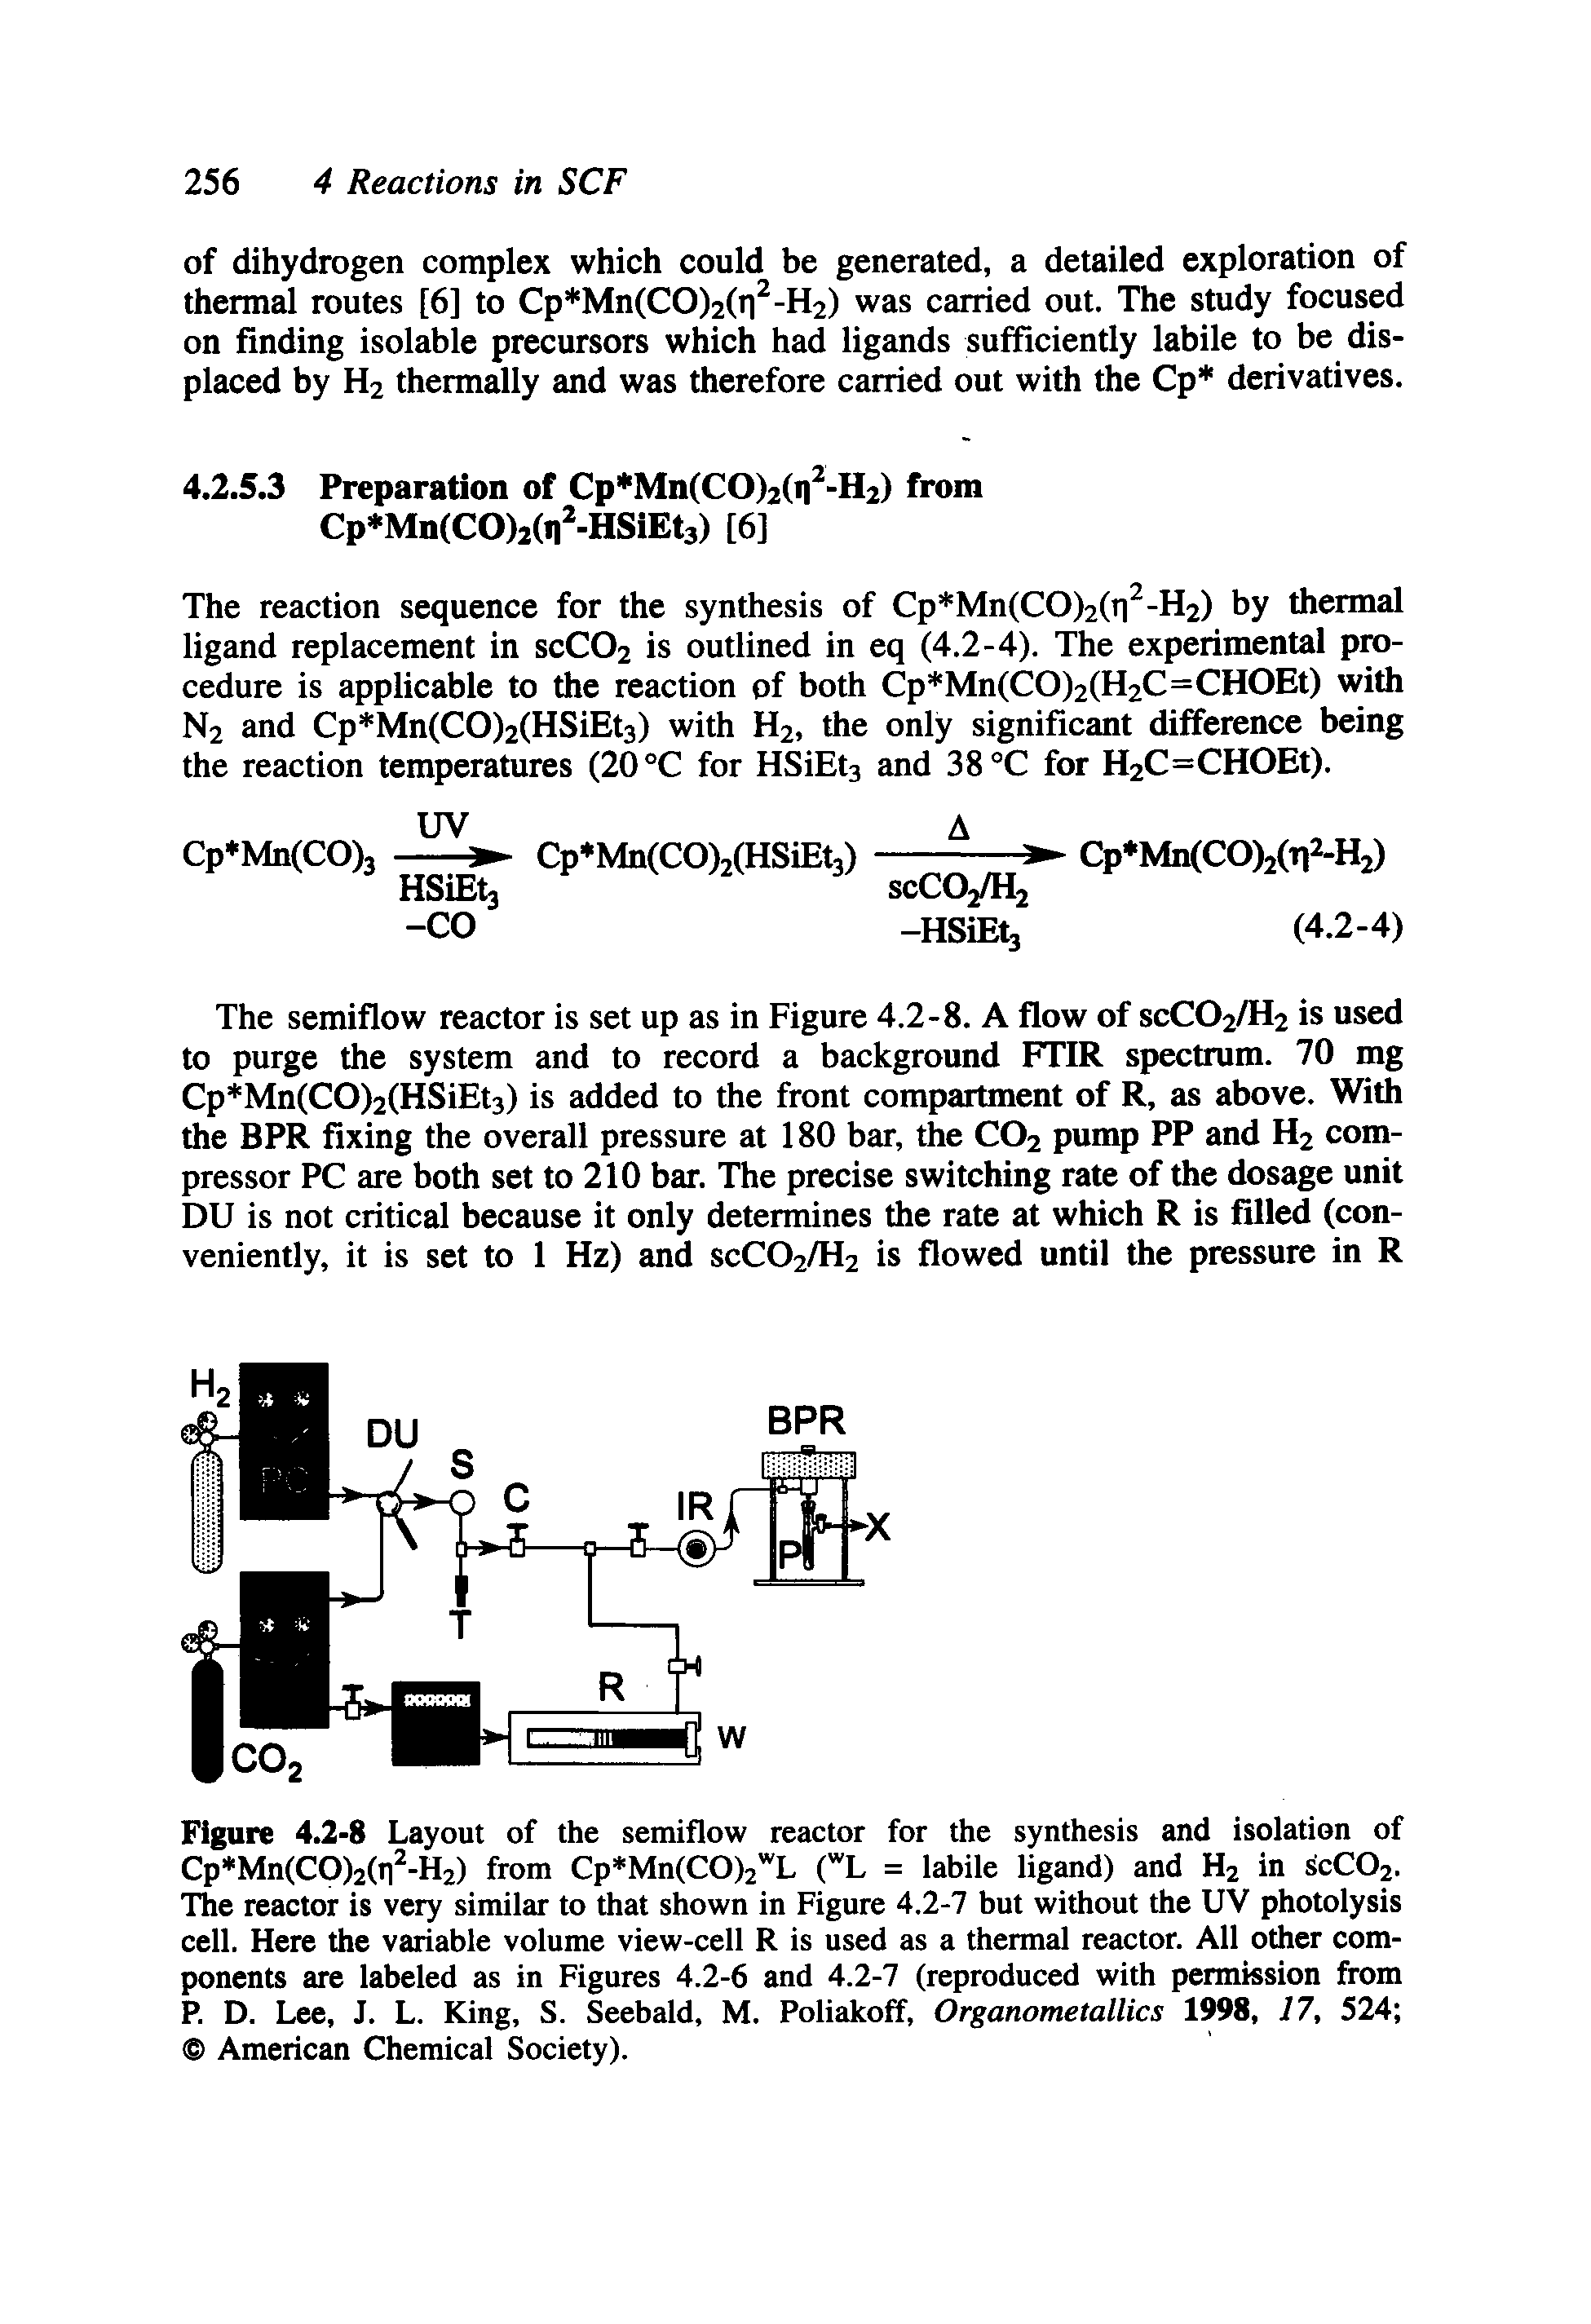 Figure 4.2-8 Layout of the semiflow reactor for the synthesis and isolation of Cp Mn(CO)2(tl -H2) from Cp Mn(CO)2 L ( L = labile ligand) and H2 in SCCO2. The reactor is very similar to that shown in Figure 4.2-7 but without the UV photolysis cell. Here the variable volume view-cell R is used as a thermal reactor. All other components are labeled as in Figures 4.2-6 and 4.2-7 (reproduced with permission from P. D. Lee, J. L. King, S. Seebald, M. Poliakoff, Organometallics 1998, 77, 524 American Chemical Society).